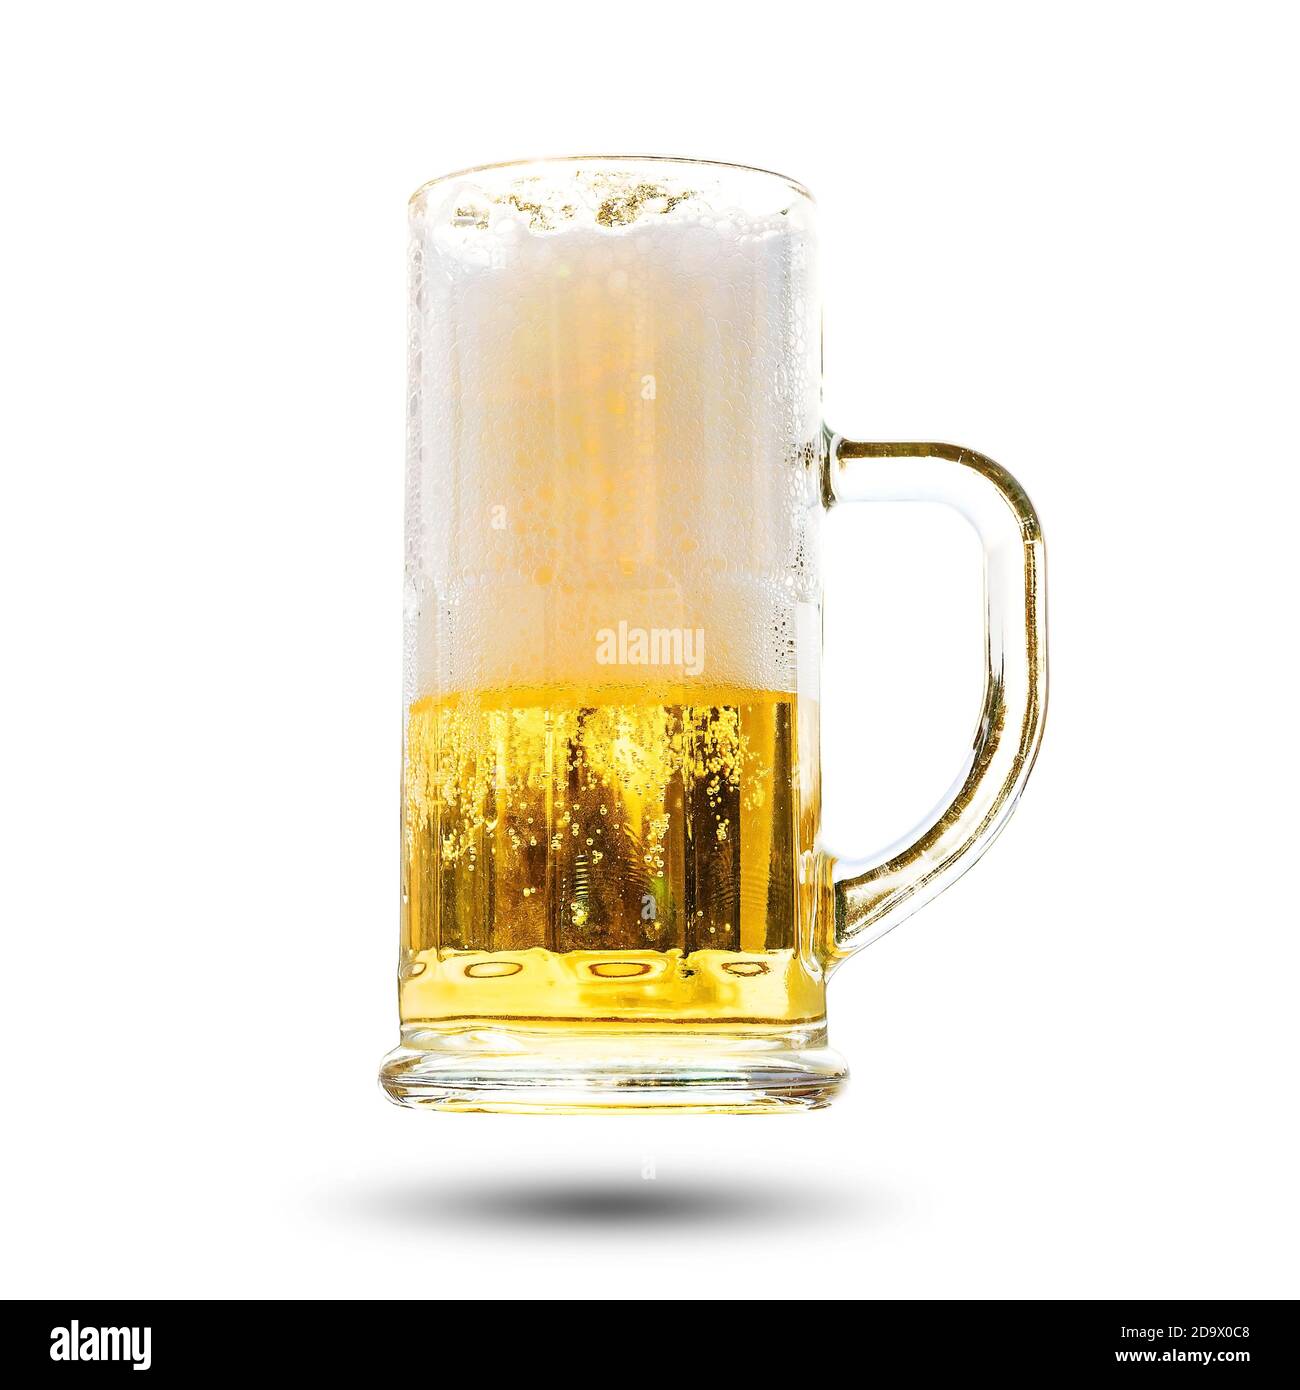 Beer in a glass with a handle isolated on white background. Stock Photo